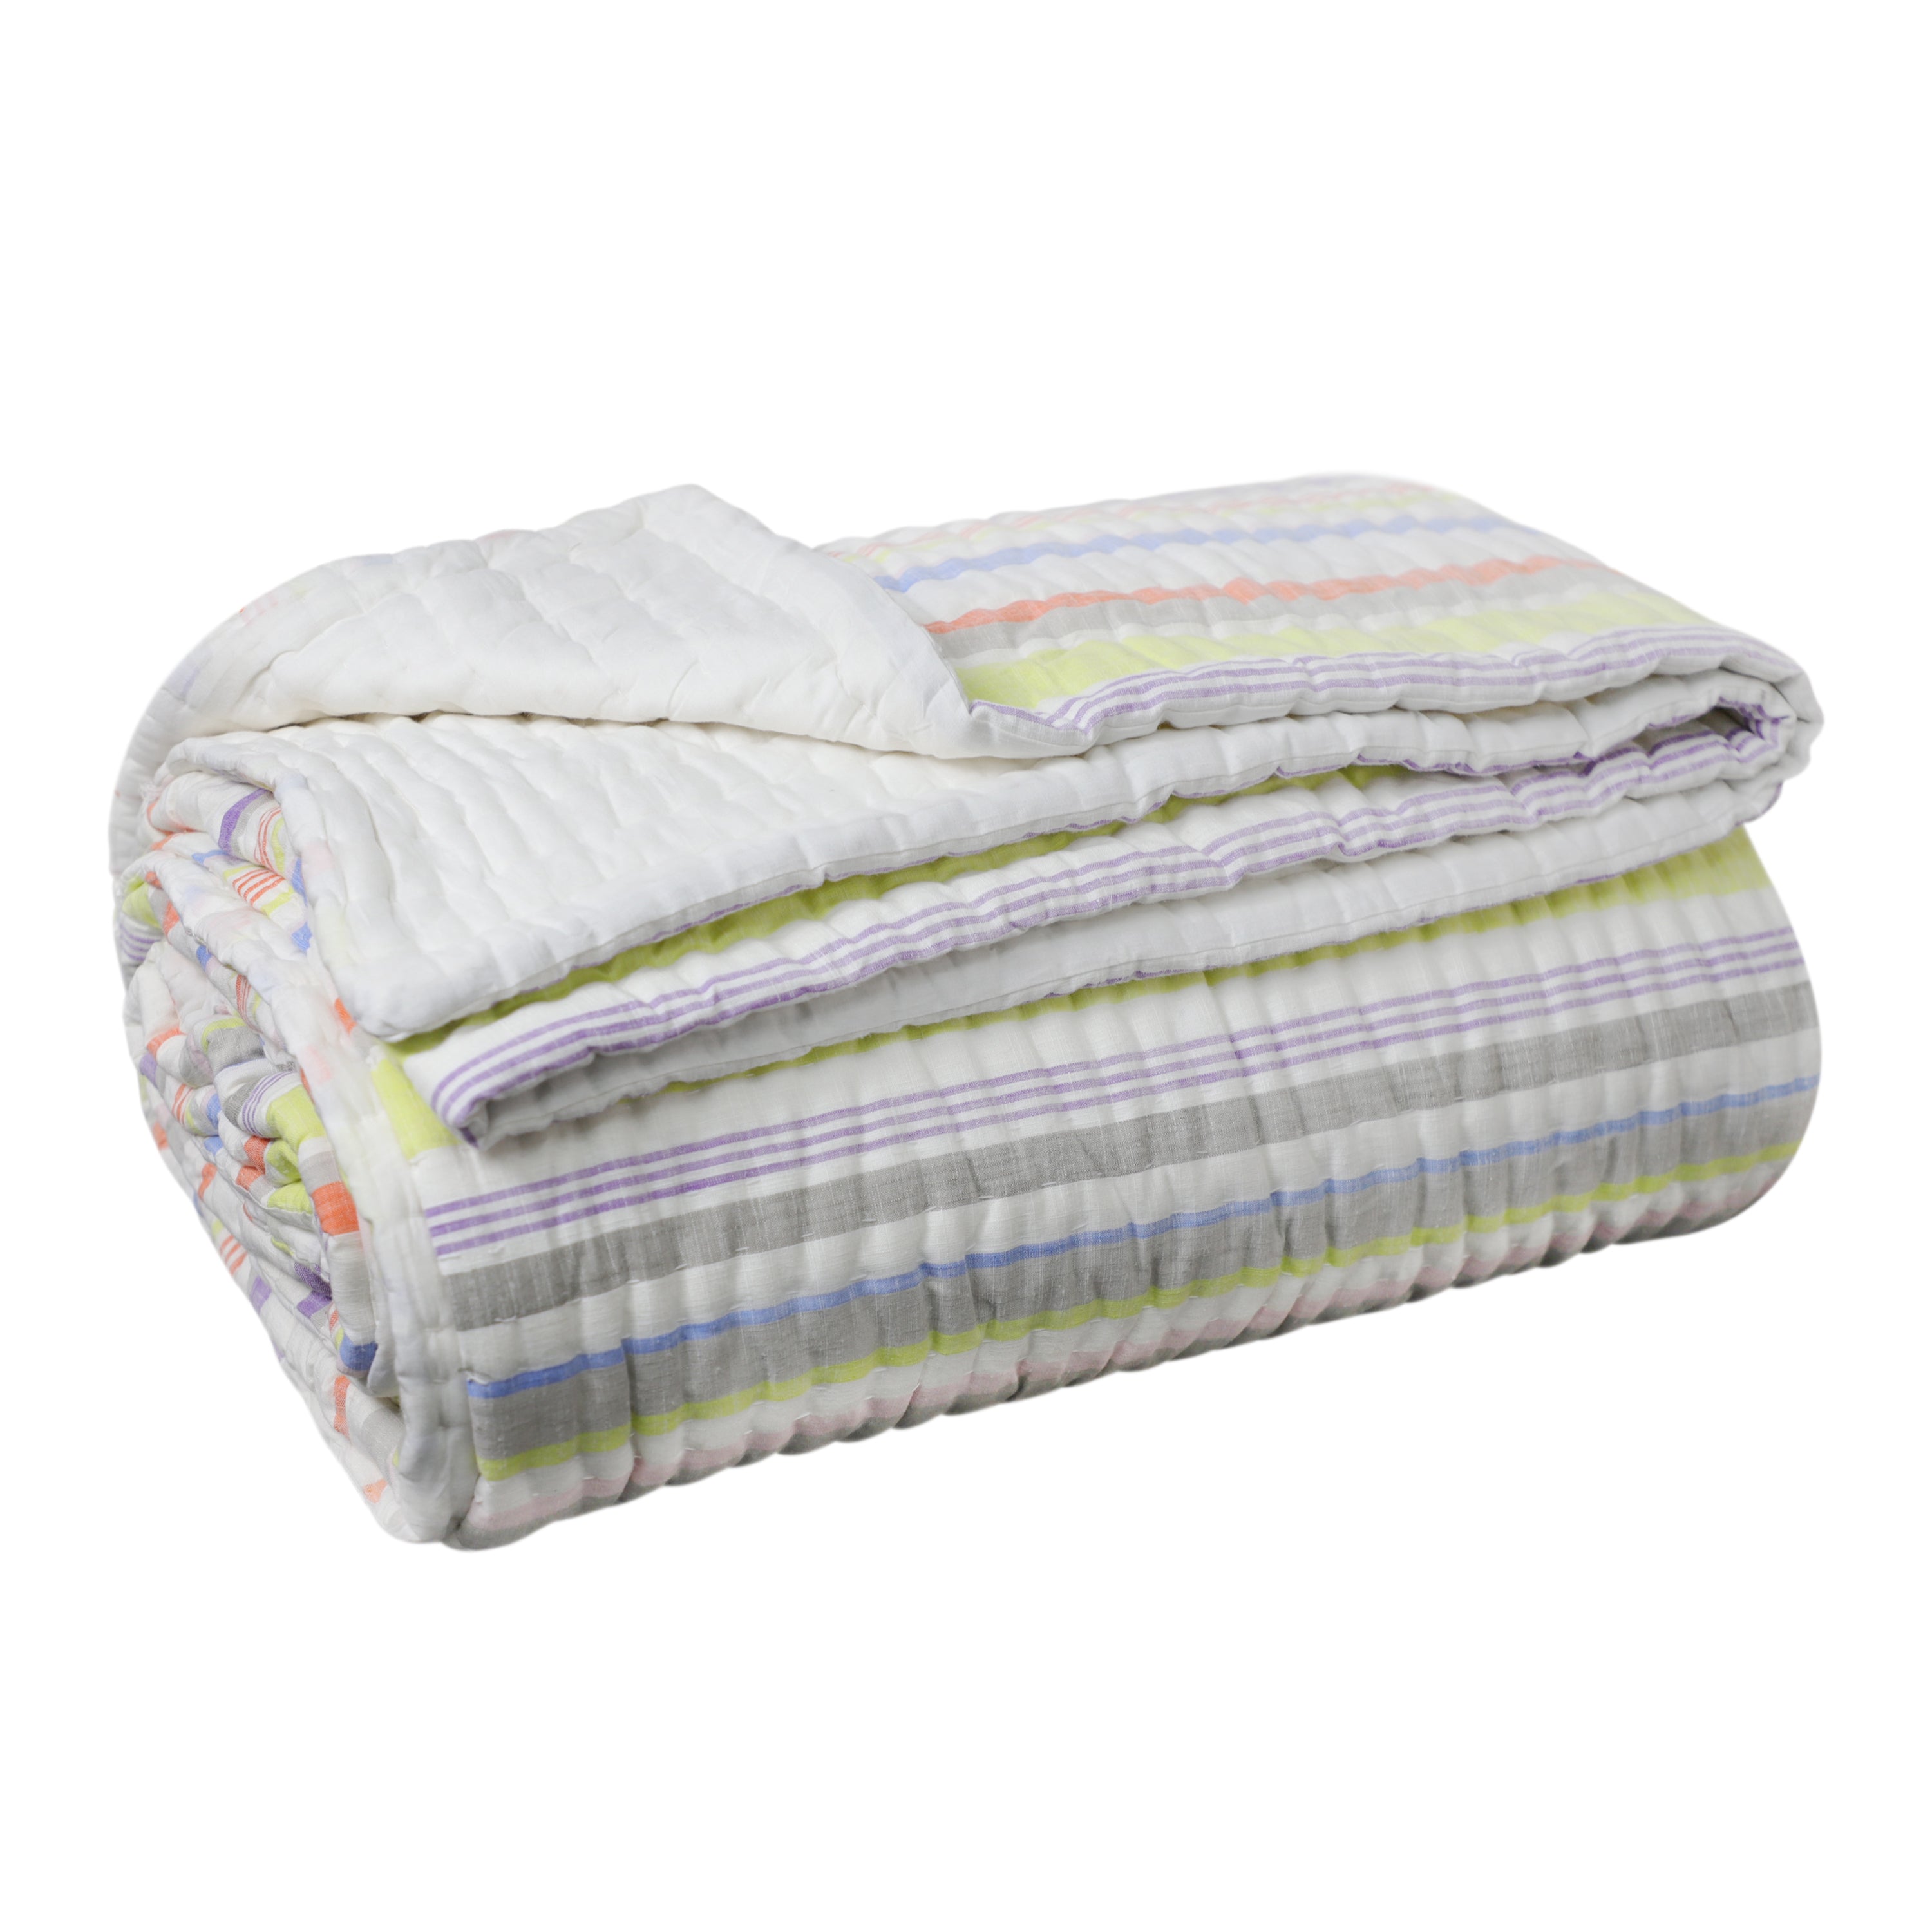 Cozy multicolored striped cotton quilt, inviting for a relaxing nap. Shop now! Get free shipping worldwide.